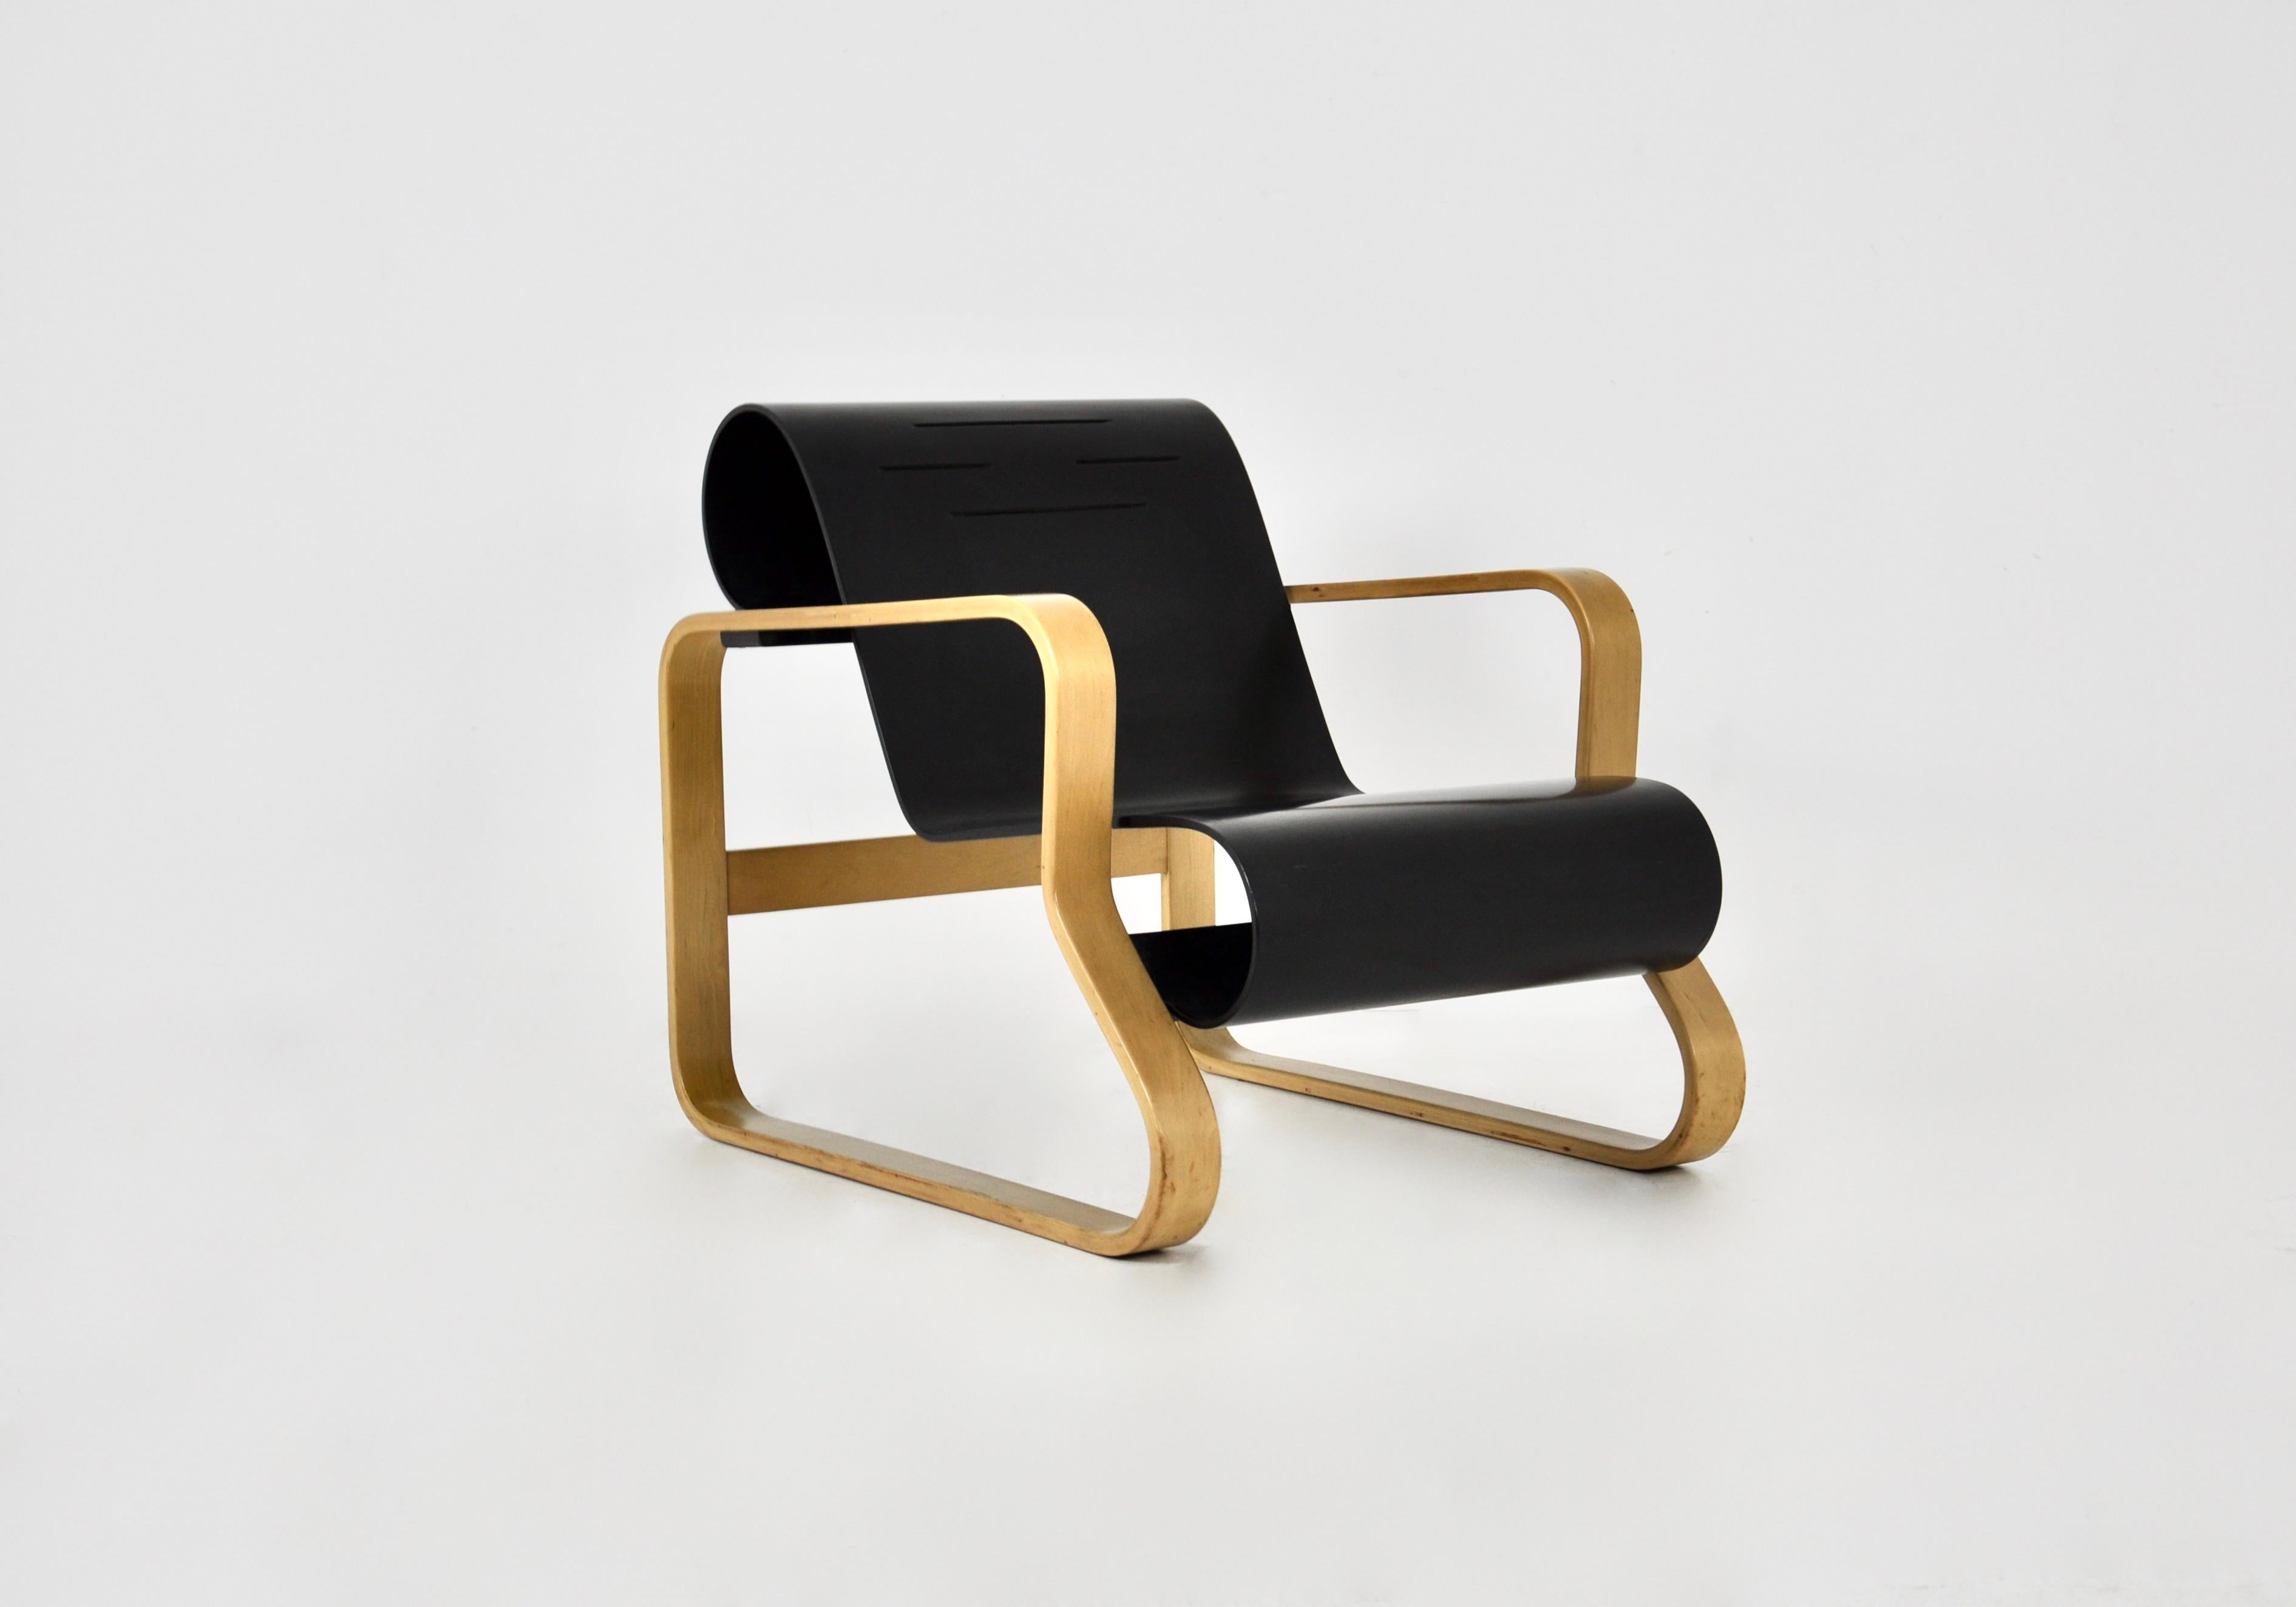 Black wooden armchair with ventilation in the seat. Seat height: 34.5 cm. Armchair designed in the 30's by Alvar Aalto
In his designs, Alvar Aalto combines the functional ideas of Bauhaus with Scandinavian craftsmanship. Wear and tear due to time